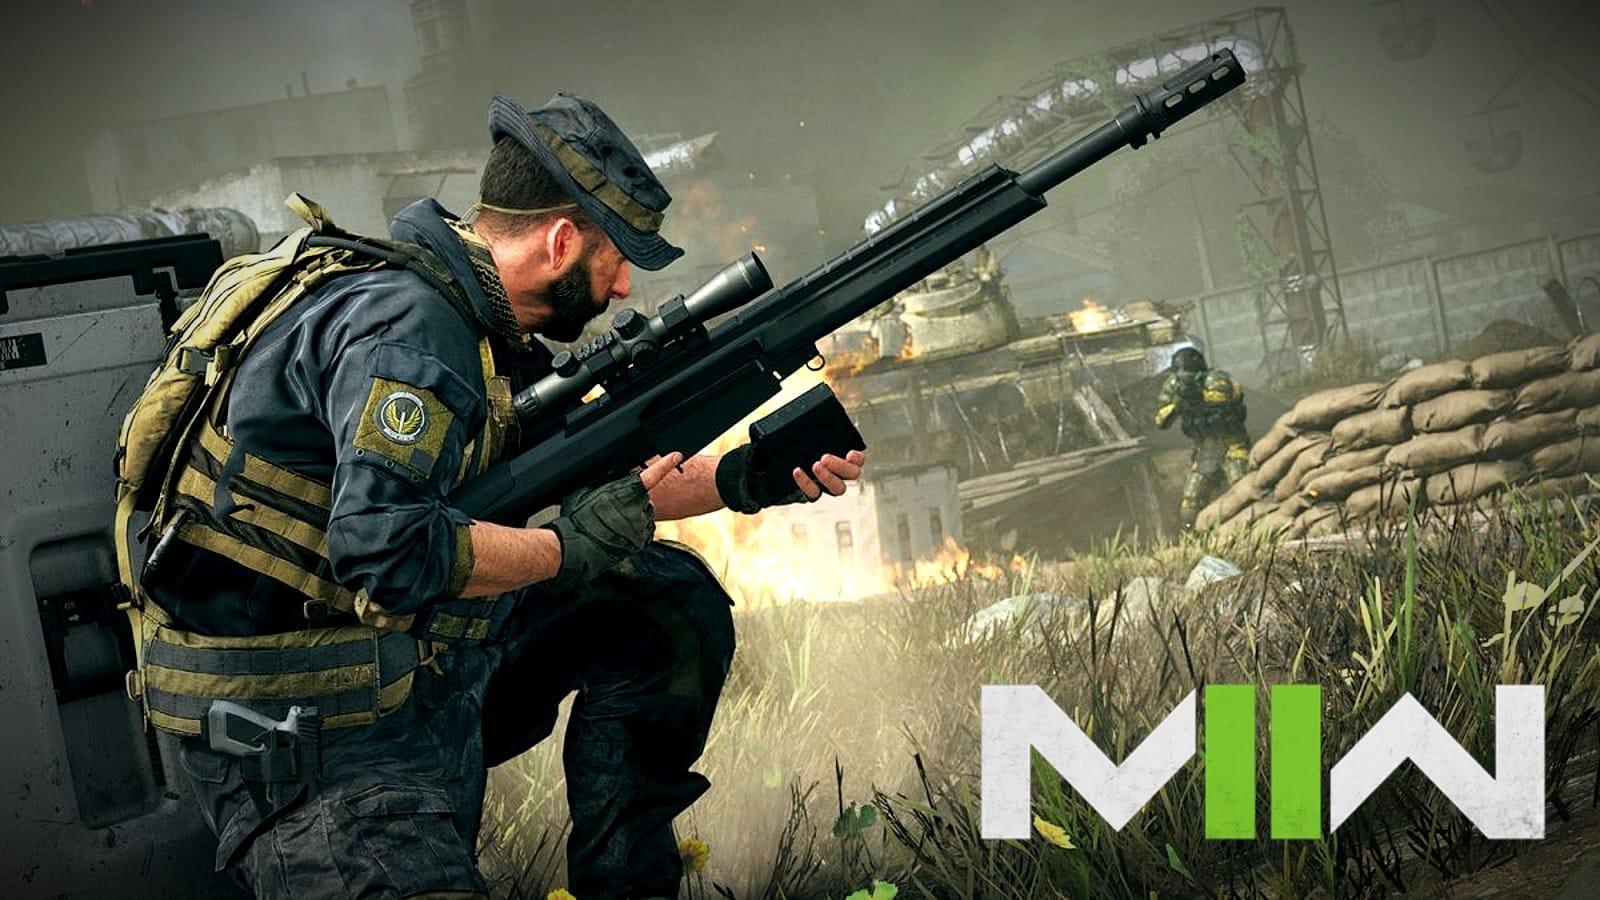 Five years later, Call of Duty returns to Steam with Modern